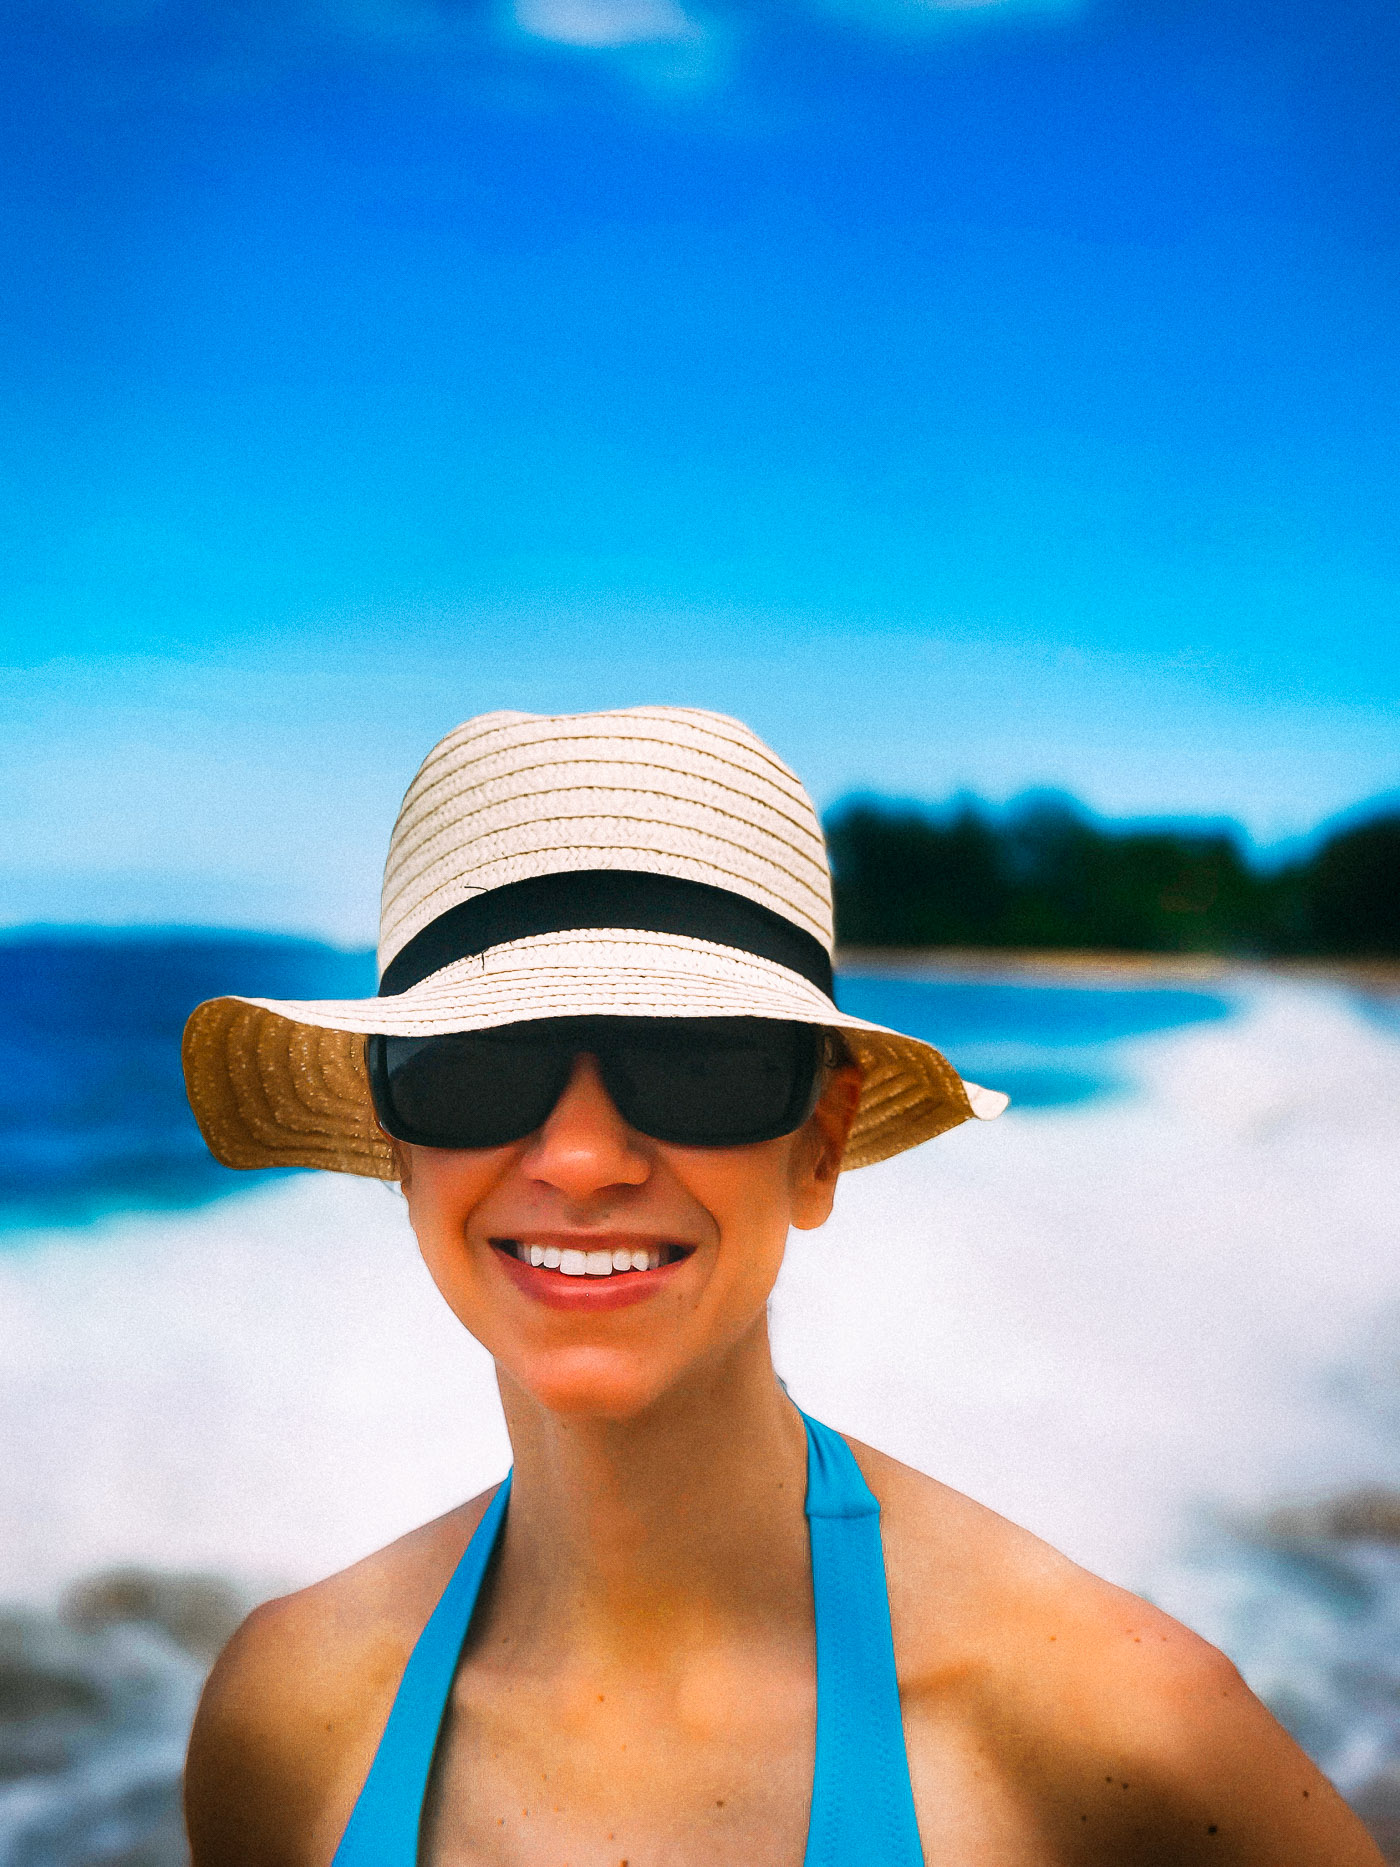 A woman wearing blue swimsuit, sunglasses, and hat on the beach.